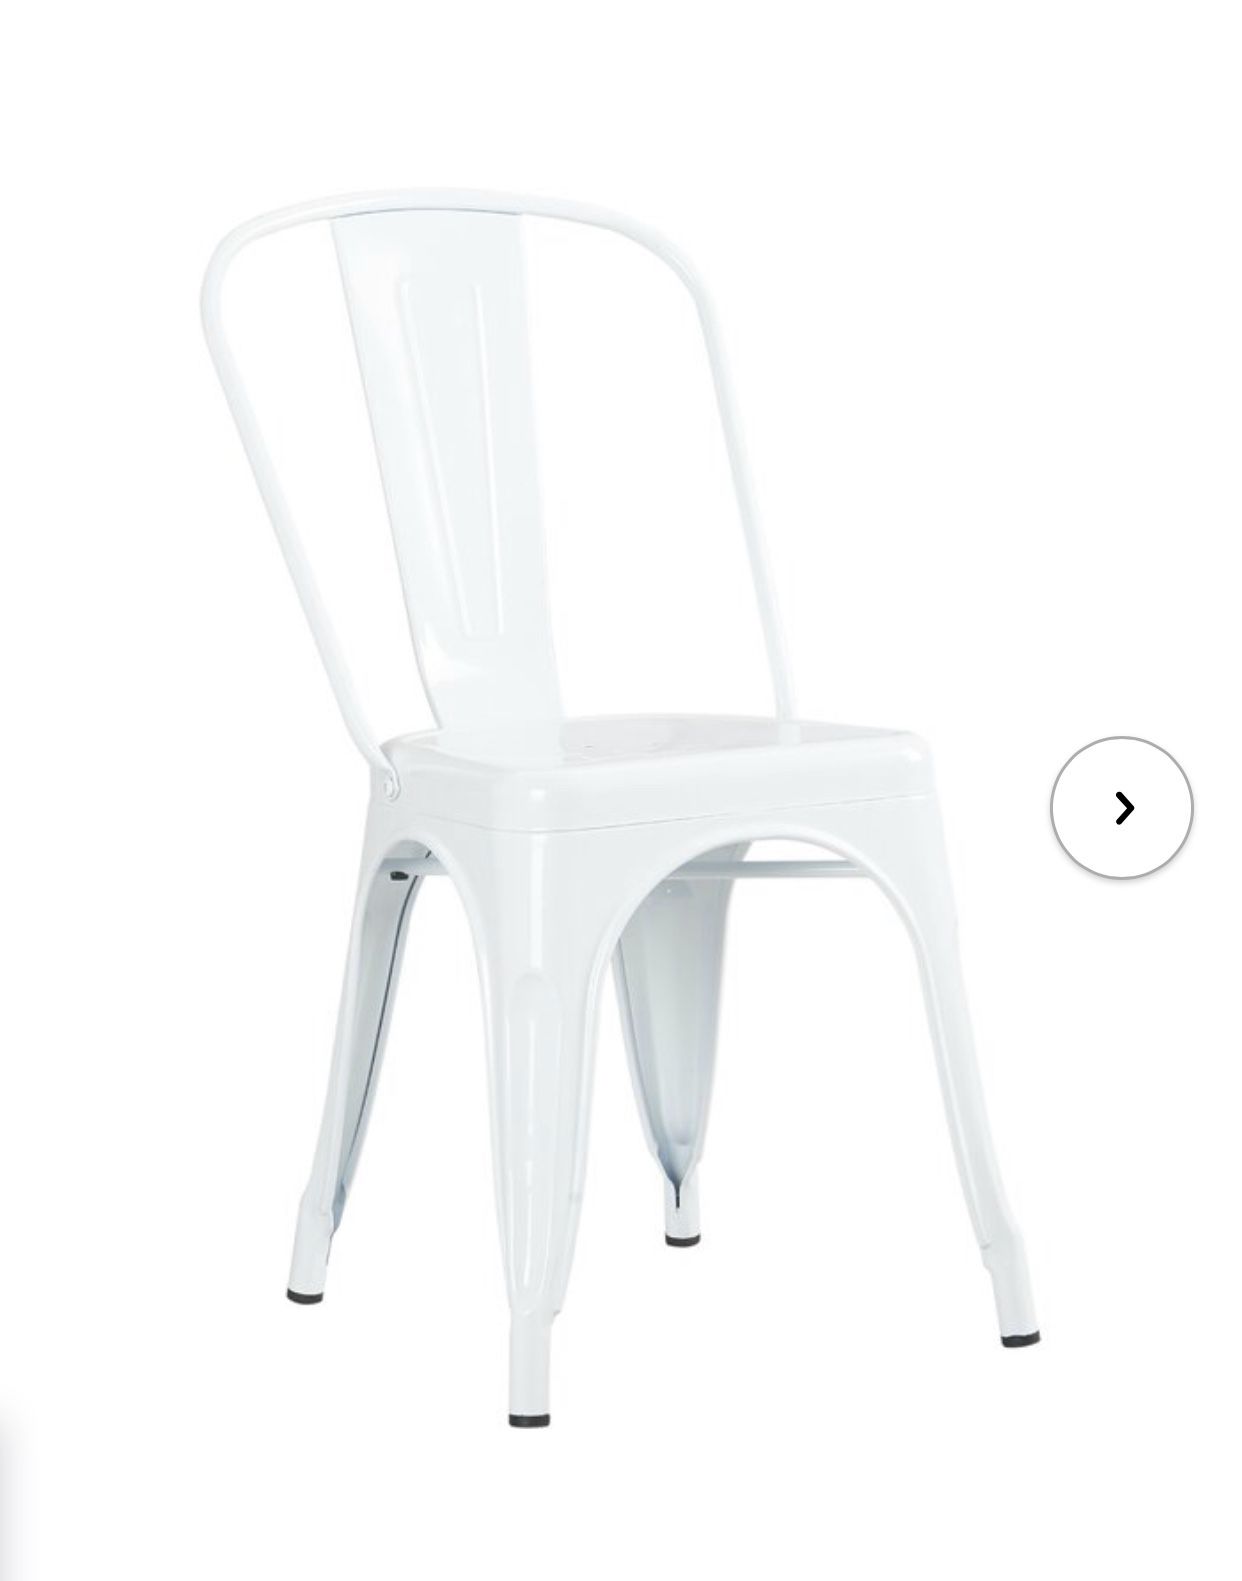 NEW white dining chairs (set of 2)